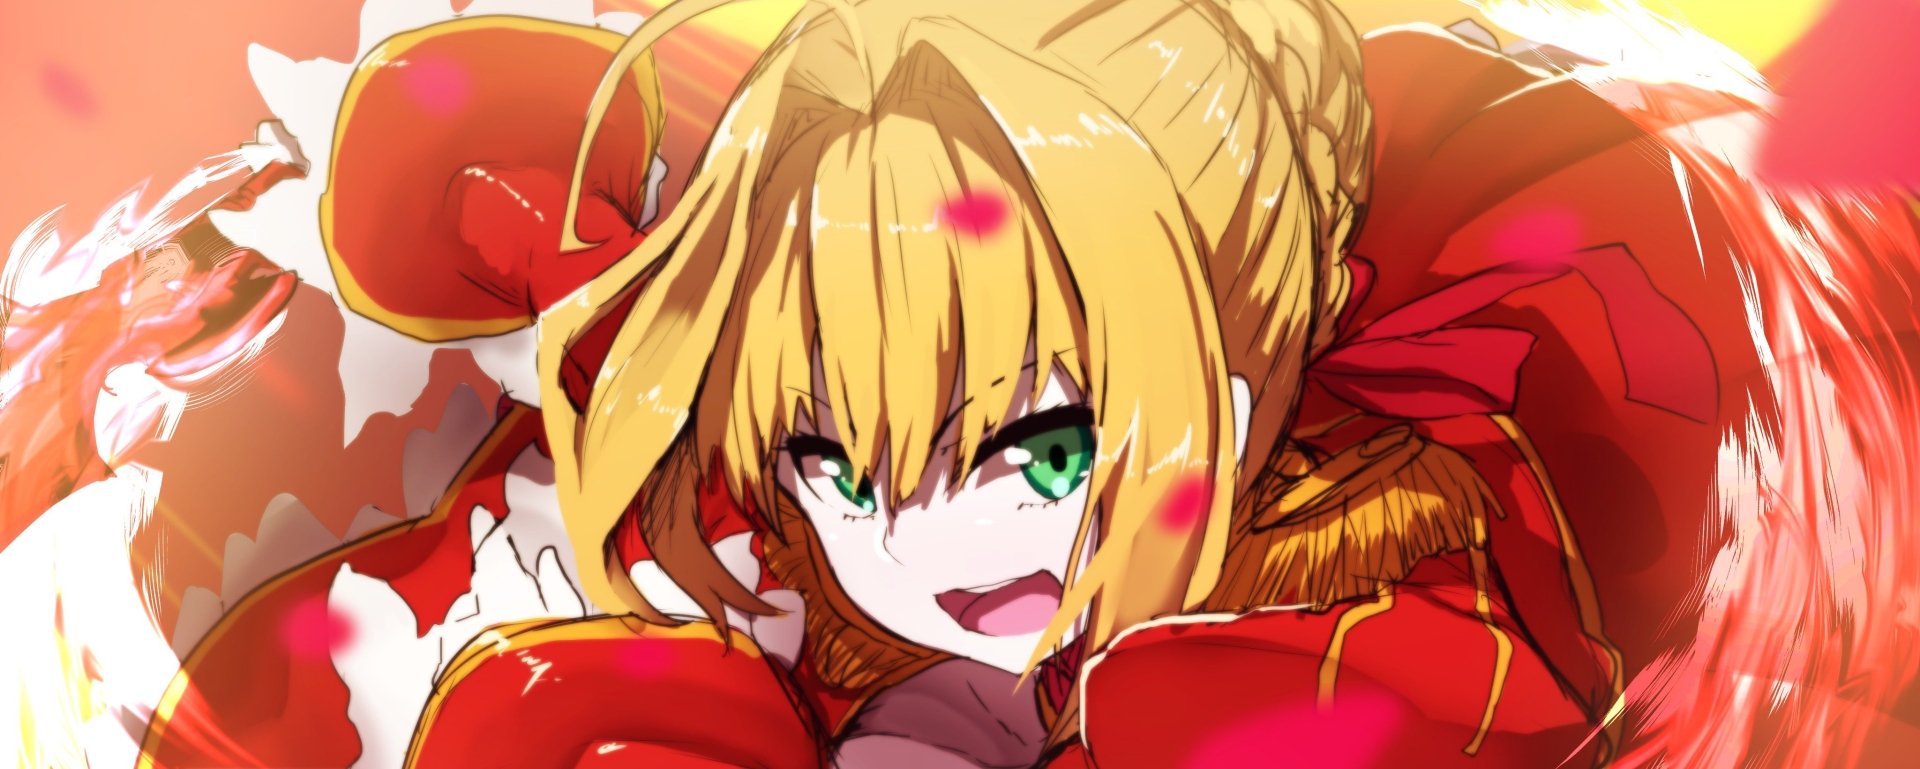 Download Saber (Fate Series) Nero Claudius Anime Fate/extra HD ...